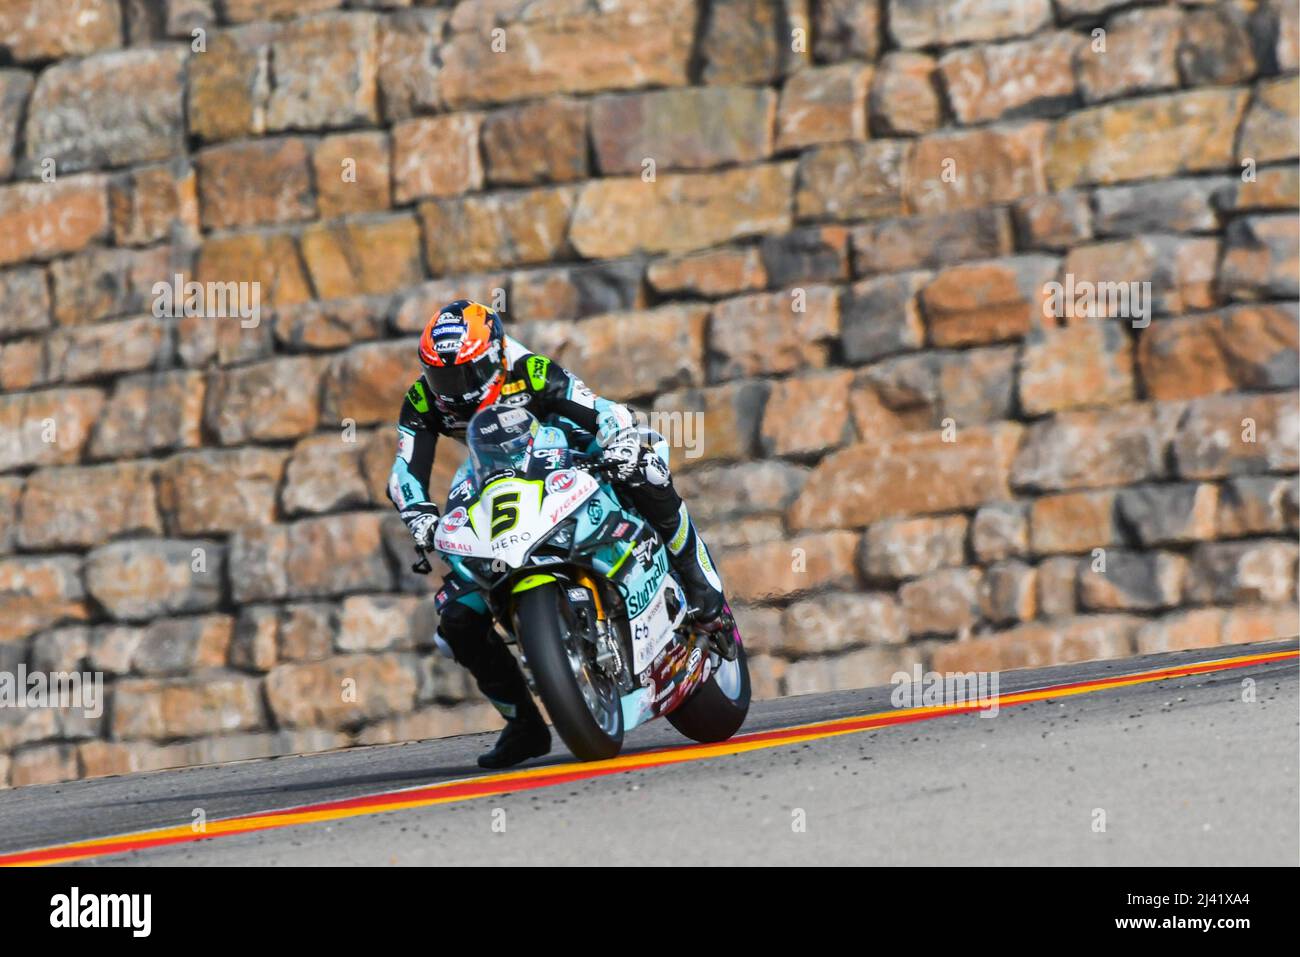 Philipp Oettl (5) of Germany and Team GoEleven during the WorldSBK Free  Practice 1 of the Aragon Grand Prix at Motorland racetrack in Alcaniz,  Spain on April 09, 2022 (Photo: Alvaro Sanchez)